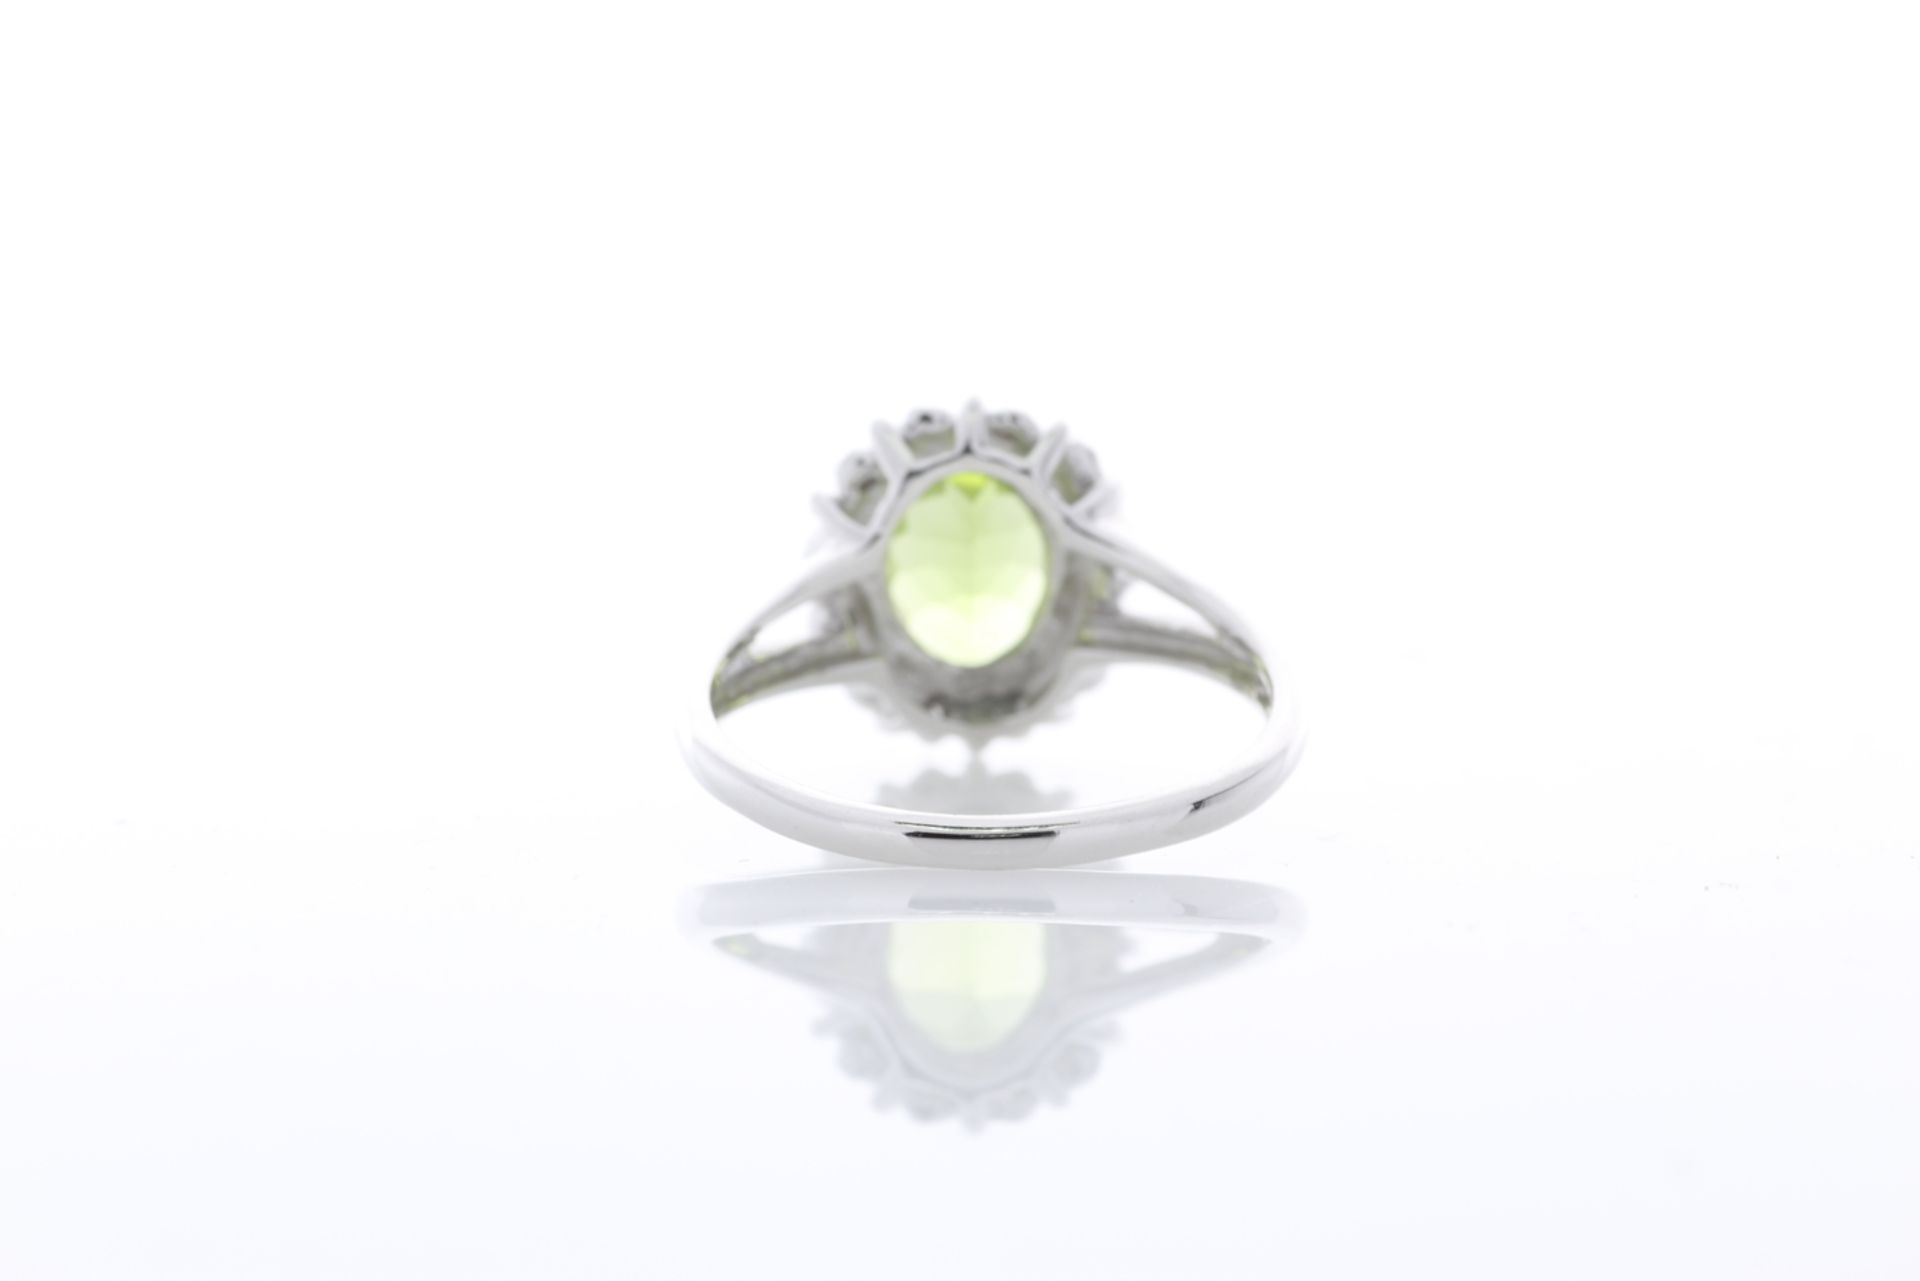 9ct White Gold Cluster Diamond And Peridot Ring (P1.40) 0.09 Carats - Image 3 of 7